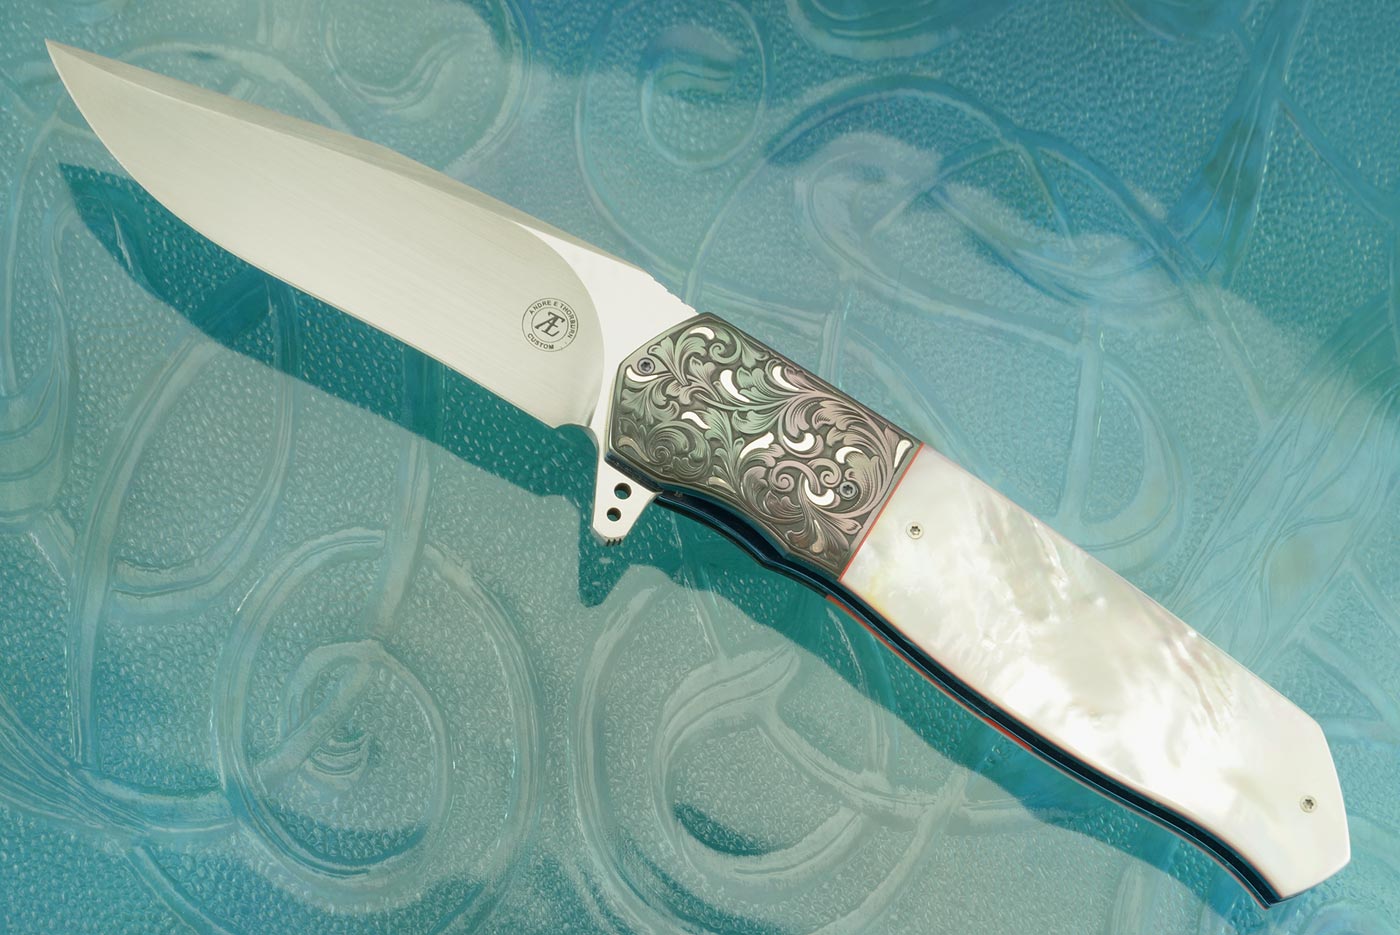 L36M Flipper with Mother of Pearl and Engraved Zirconium (Ceramic IKBS)